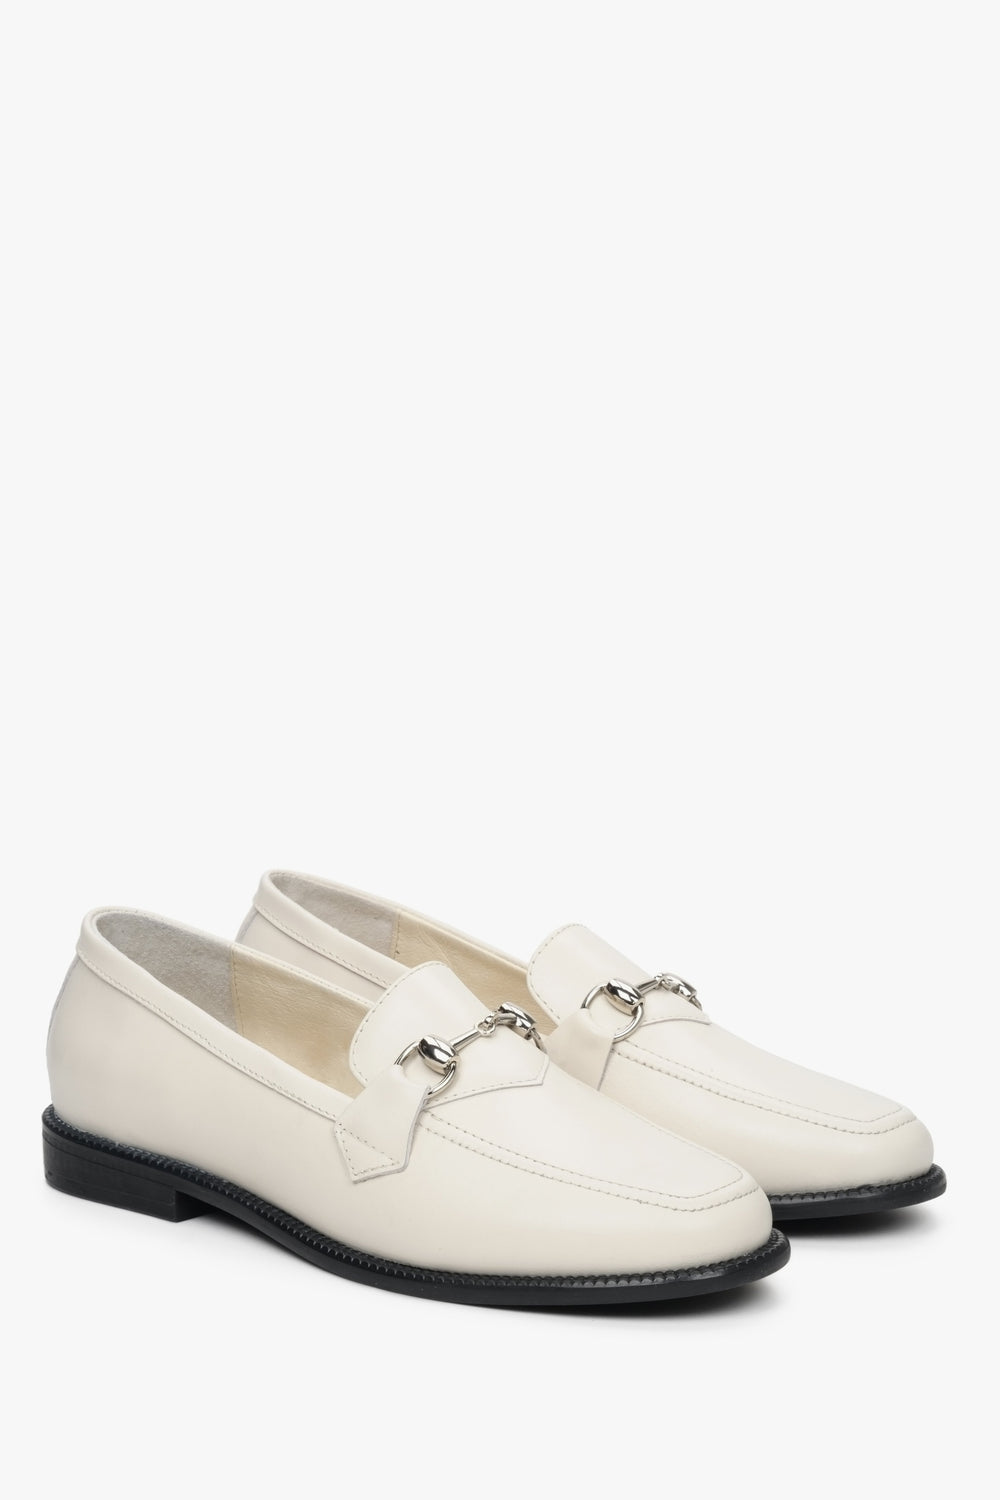 Italian leather white women's loafers with gold buckle Estro - shoe side.